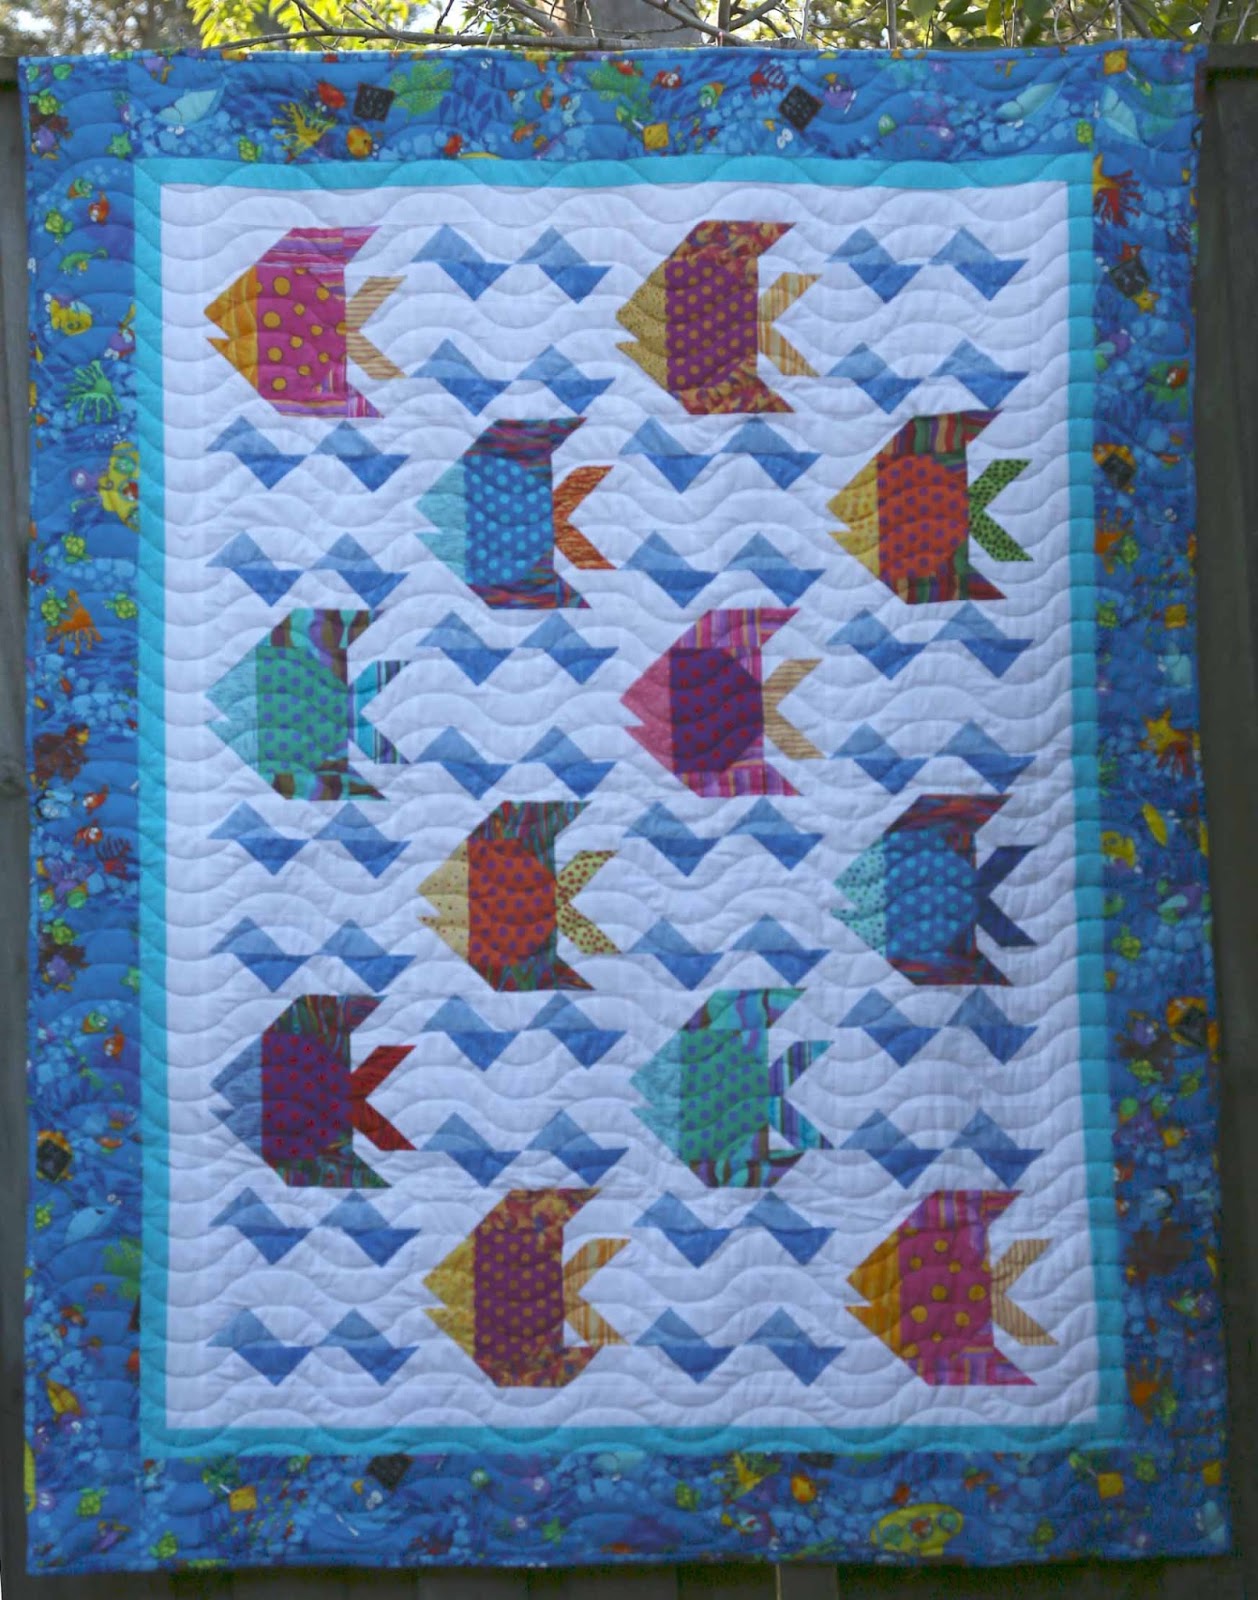 Fairholme Quilters: Community quilts, July